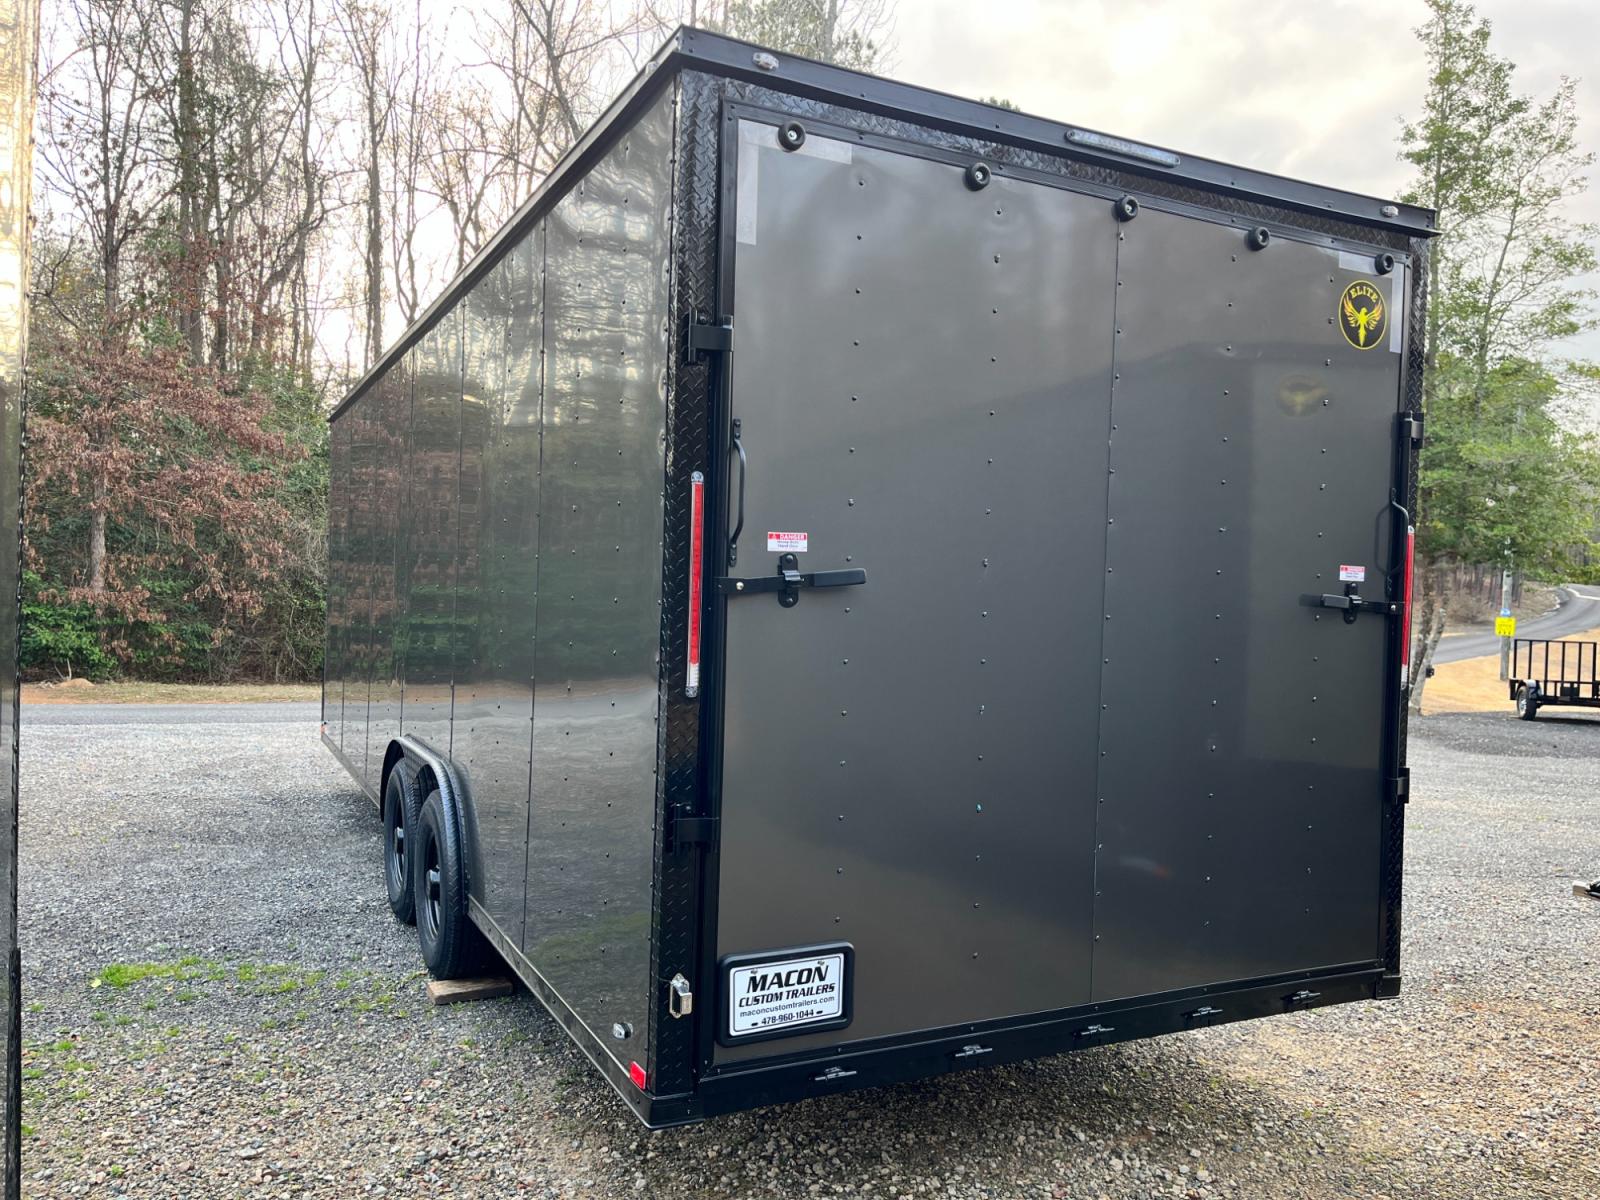 2023 .080 Charcoal Metallic w/Black Out Pkg. Elite Cargo 8.5ft X 24ft Tandem , located at 1330 Rainey Rd., Macon, 31220, (478) 960-1044, 32.845638, -83.778687 - Brand New 2023 Model Elite Cargo Trailer, Made in Tifton, GA 7ft 5" Tall Inside Height This Deluxe Enclosed Car Hauler has Awesome Features! .080 Thick Charcoal Metallic Skin! Awesome "Black Out Trim Package!" 2 Inside LED Dome Lights with Wall Switch! Much Taller Inside, 7ft 5" Tall Inside. Th - Photo #4